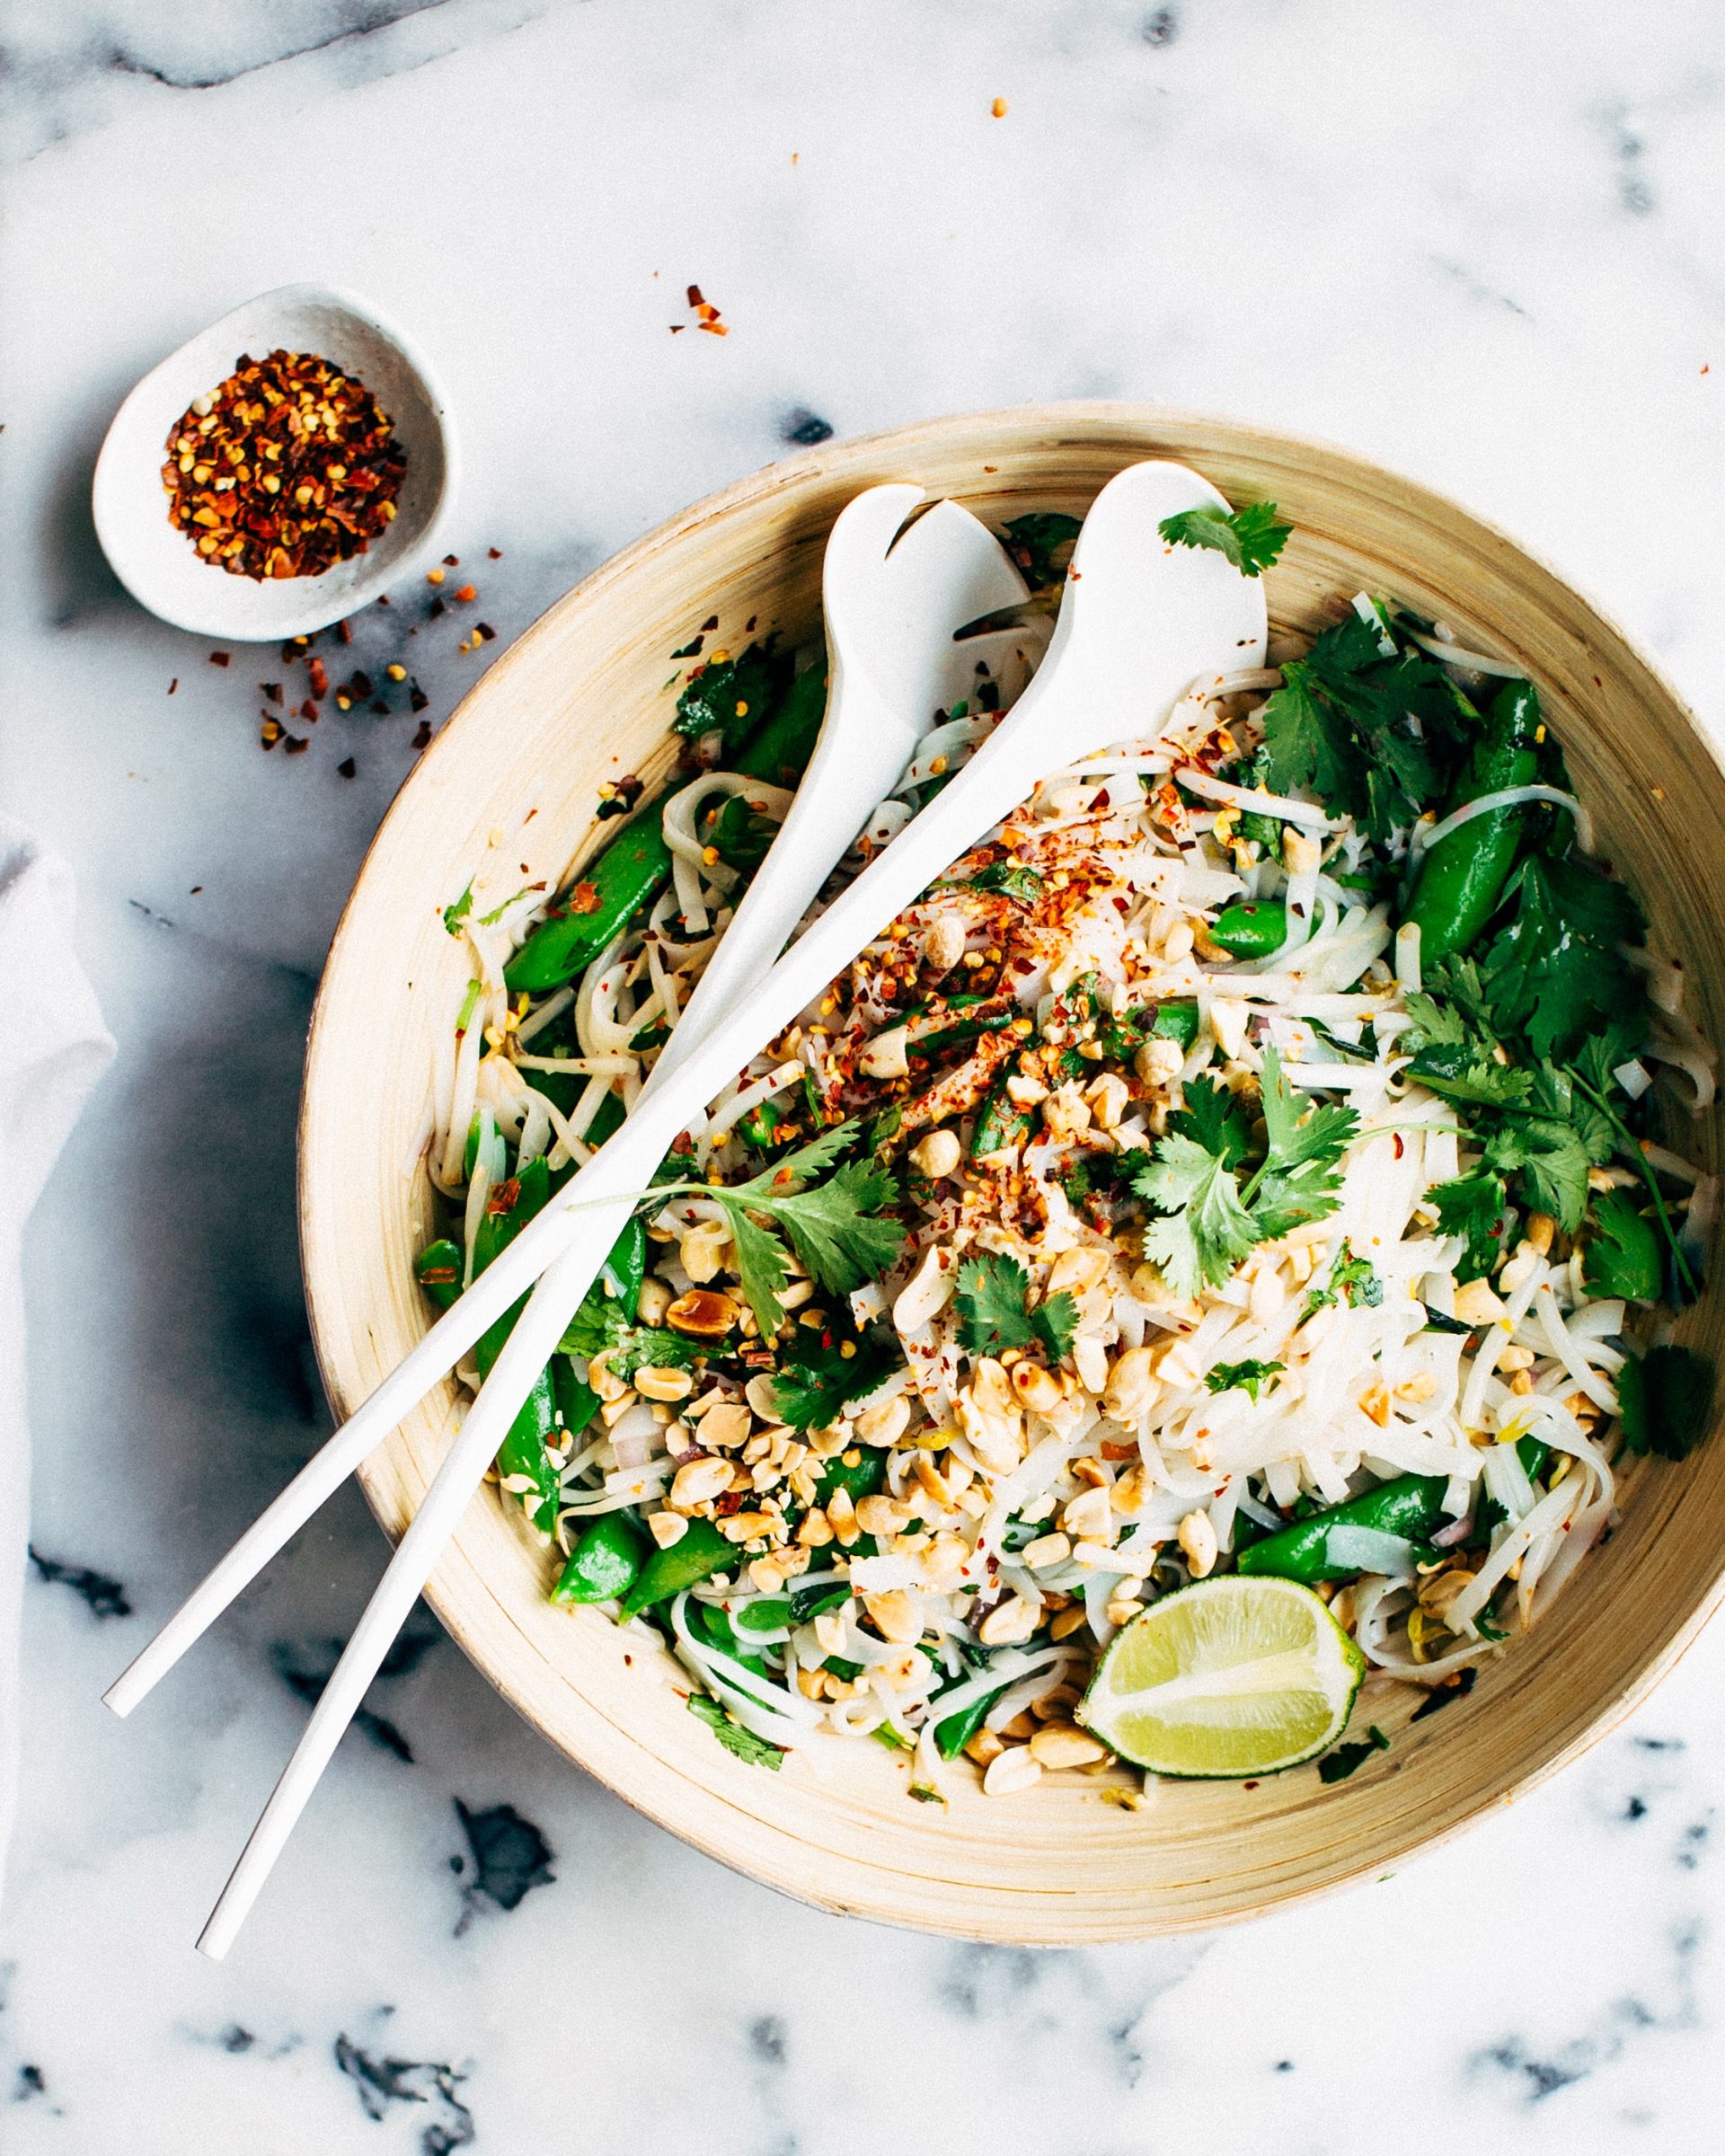 Thai Noodle Salad with Sweet Chili Dressing